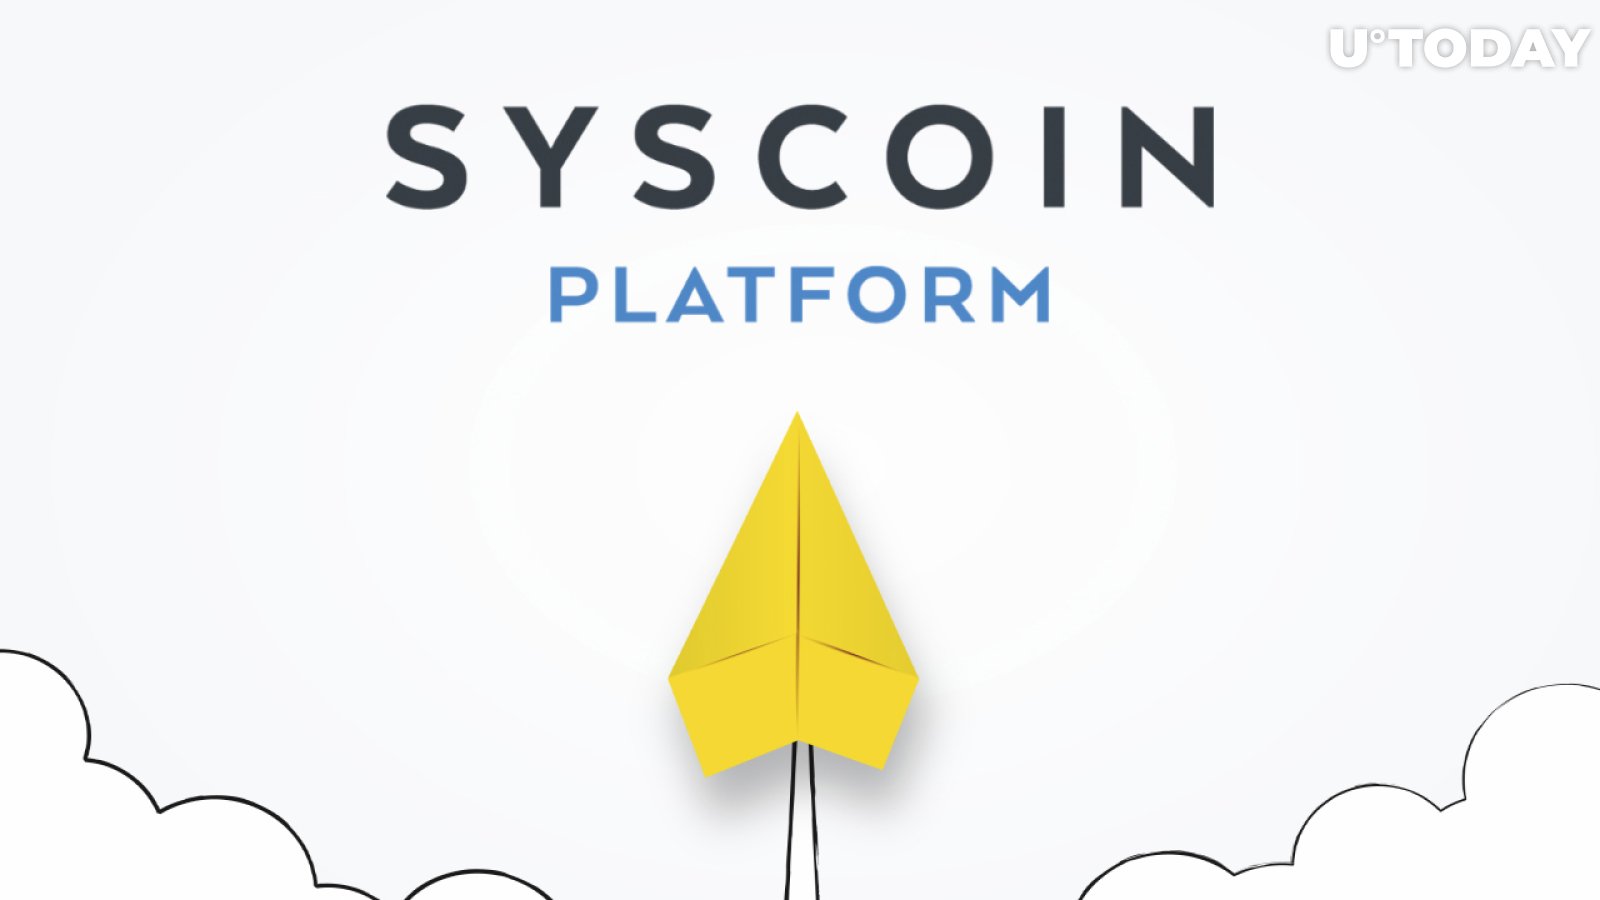 Syscoin (SYS) Launches Hybrid Smart Contract Platform